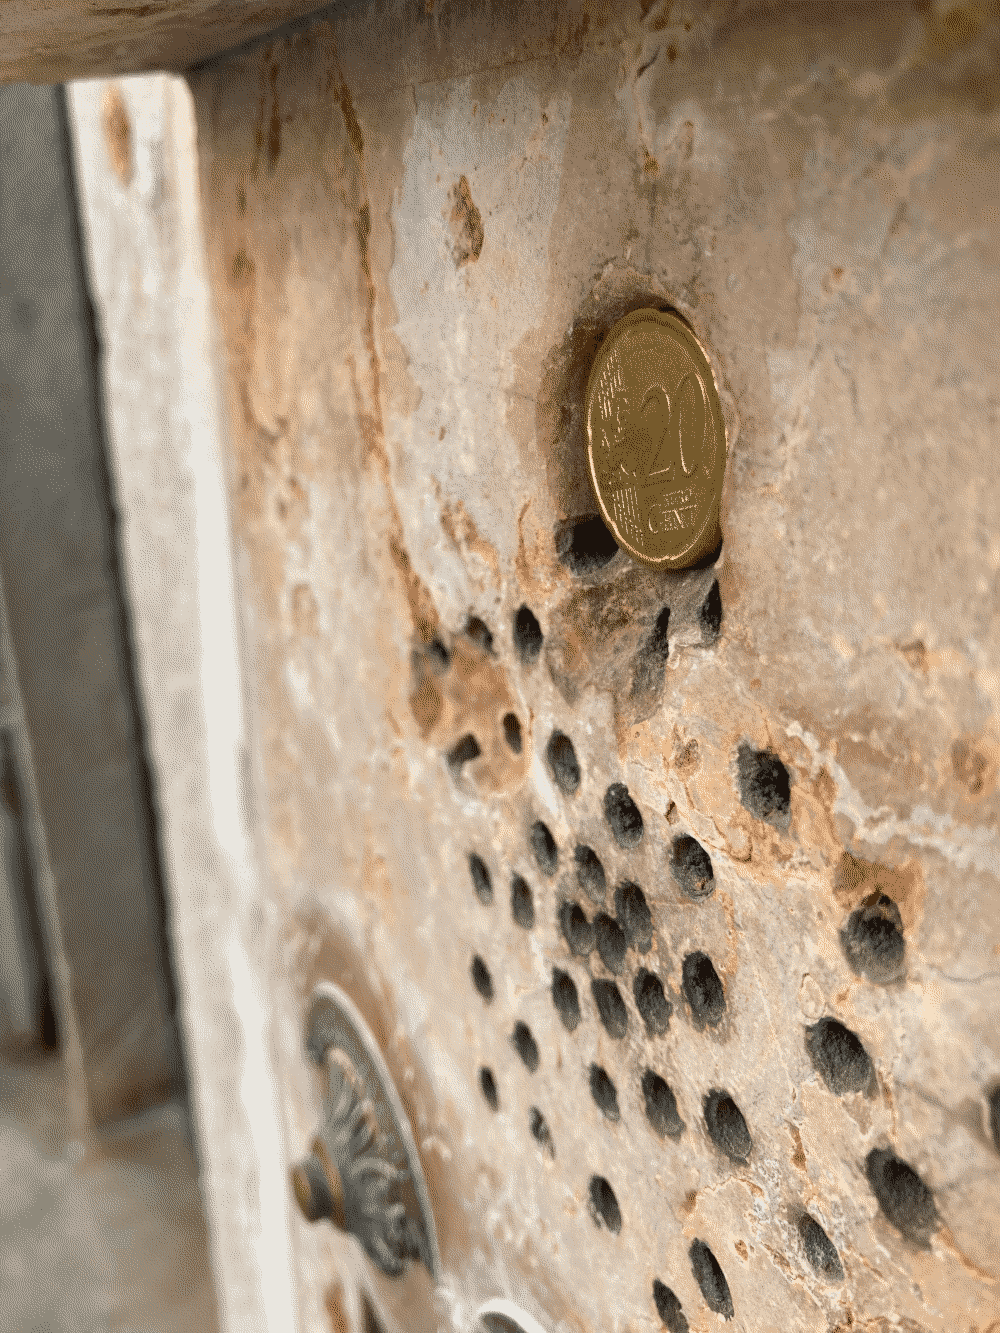 A coin fits nicely in a little hole in the wall.